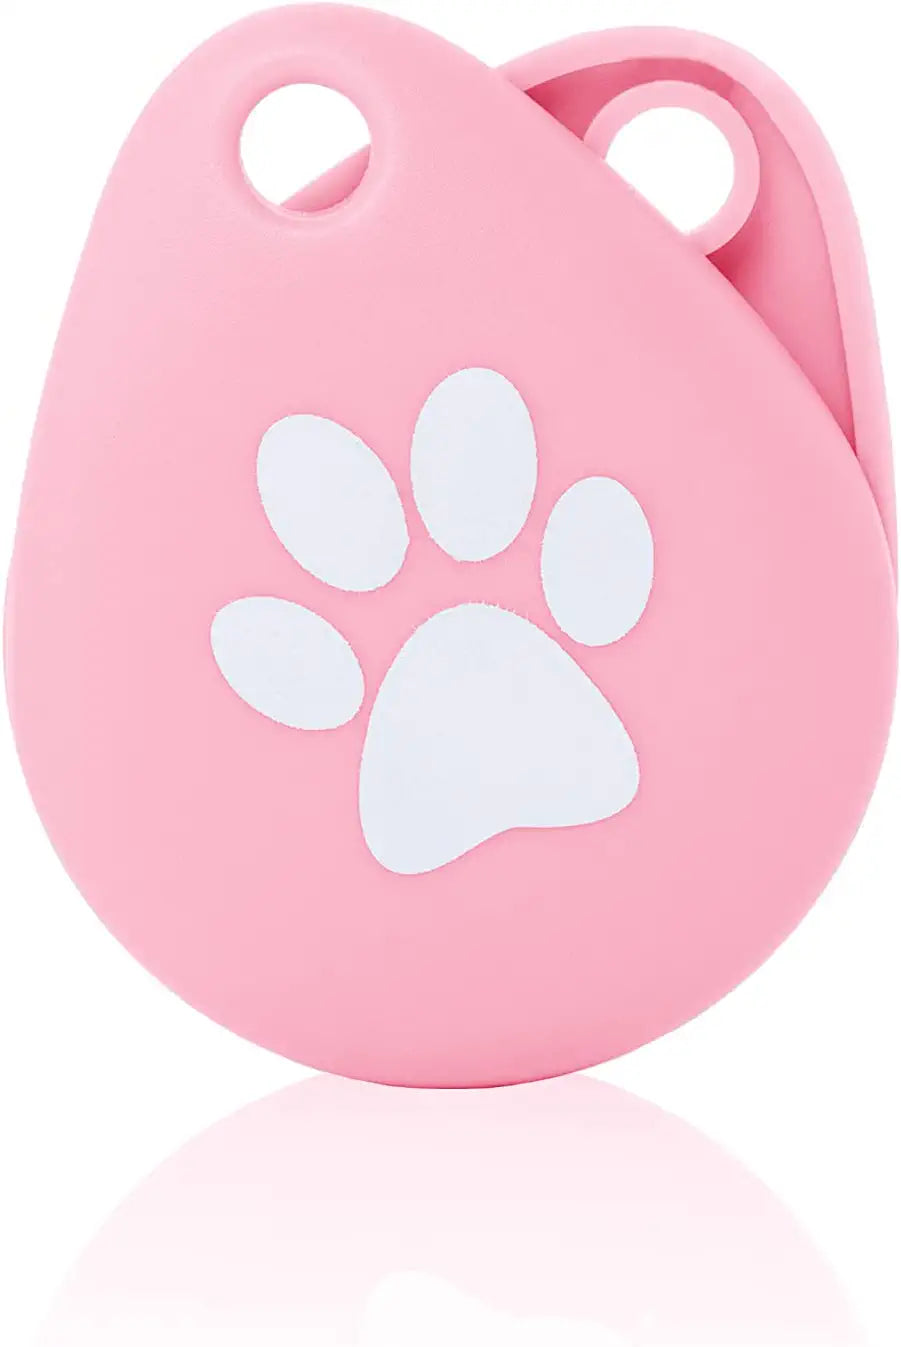 Waterproof Airtag Dog Collar Holder, Protective Airtag Case for Dog Collar, Air Tag Loop for GPS Dog Tracker, Dog Trackers for Apple Iphone, Airtag Pet, Dog Airtag Holder (Pink) Electronics > GPS Accessories > GPS Cases Uneeq Gifts   